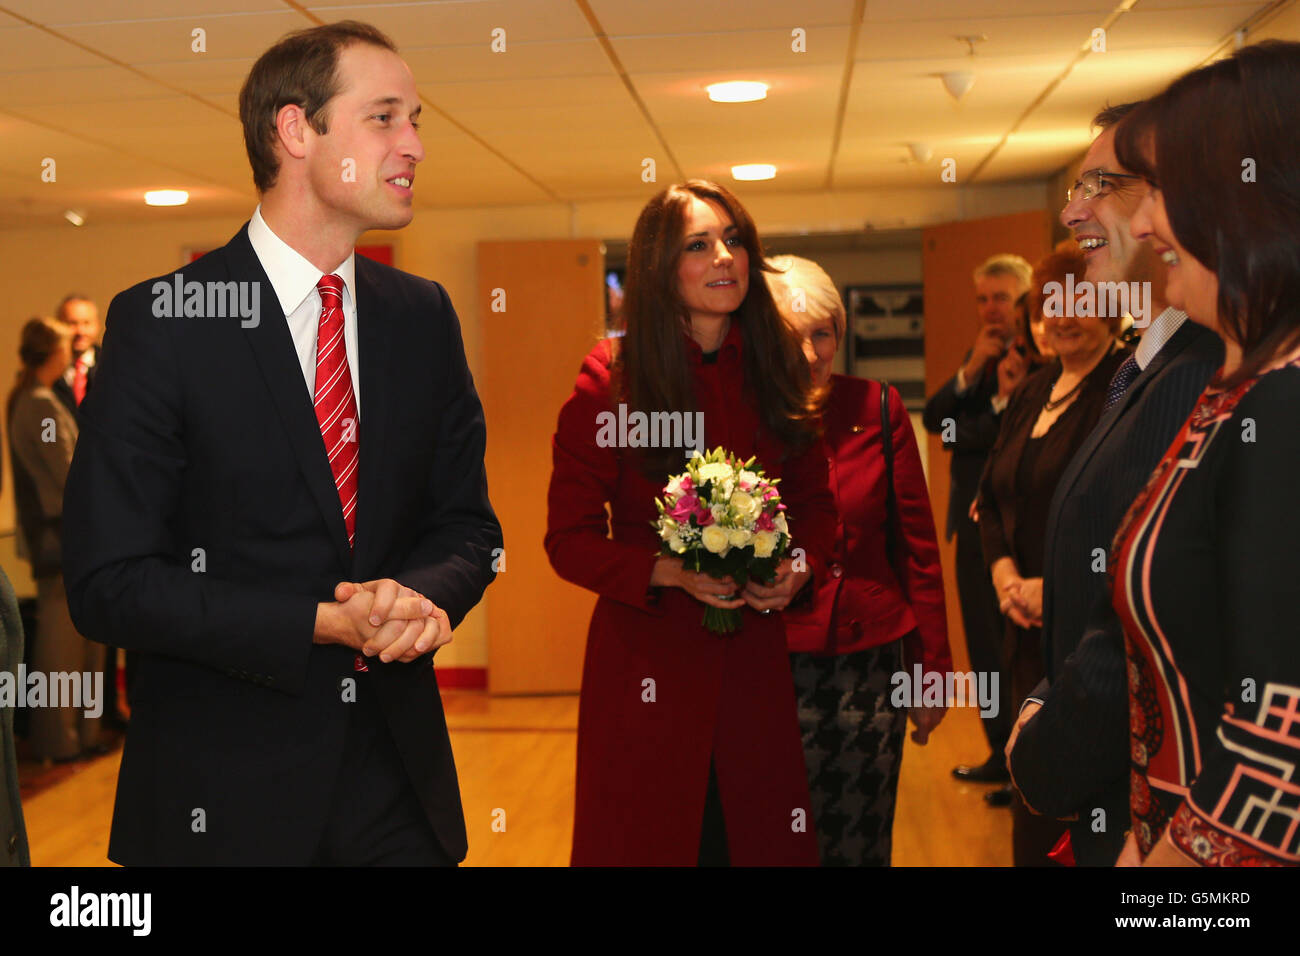 The Duke and Duchess of Cambridge arrive for a reception for the Welsh Rugby Charitable Trust (WRCT) which supports injured rugby players ahead of the autumn international rugby match between Wales and New Zealand at the Millennium Stadium in Cardiff. Stock Photo